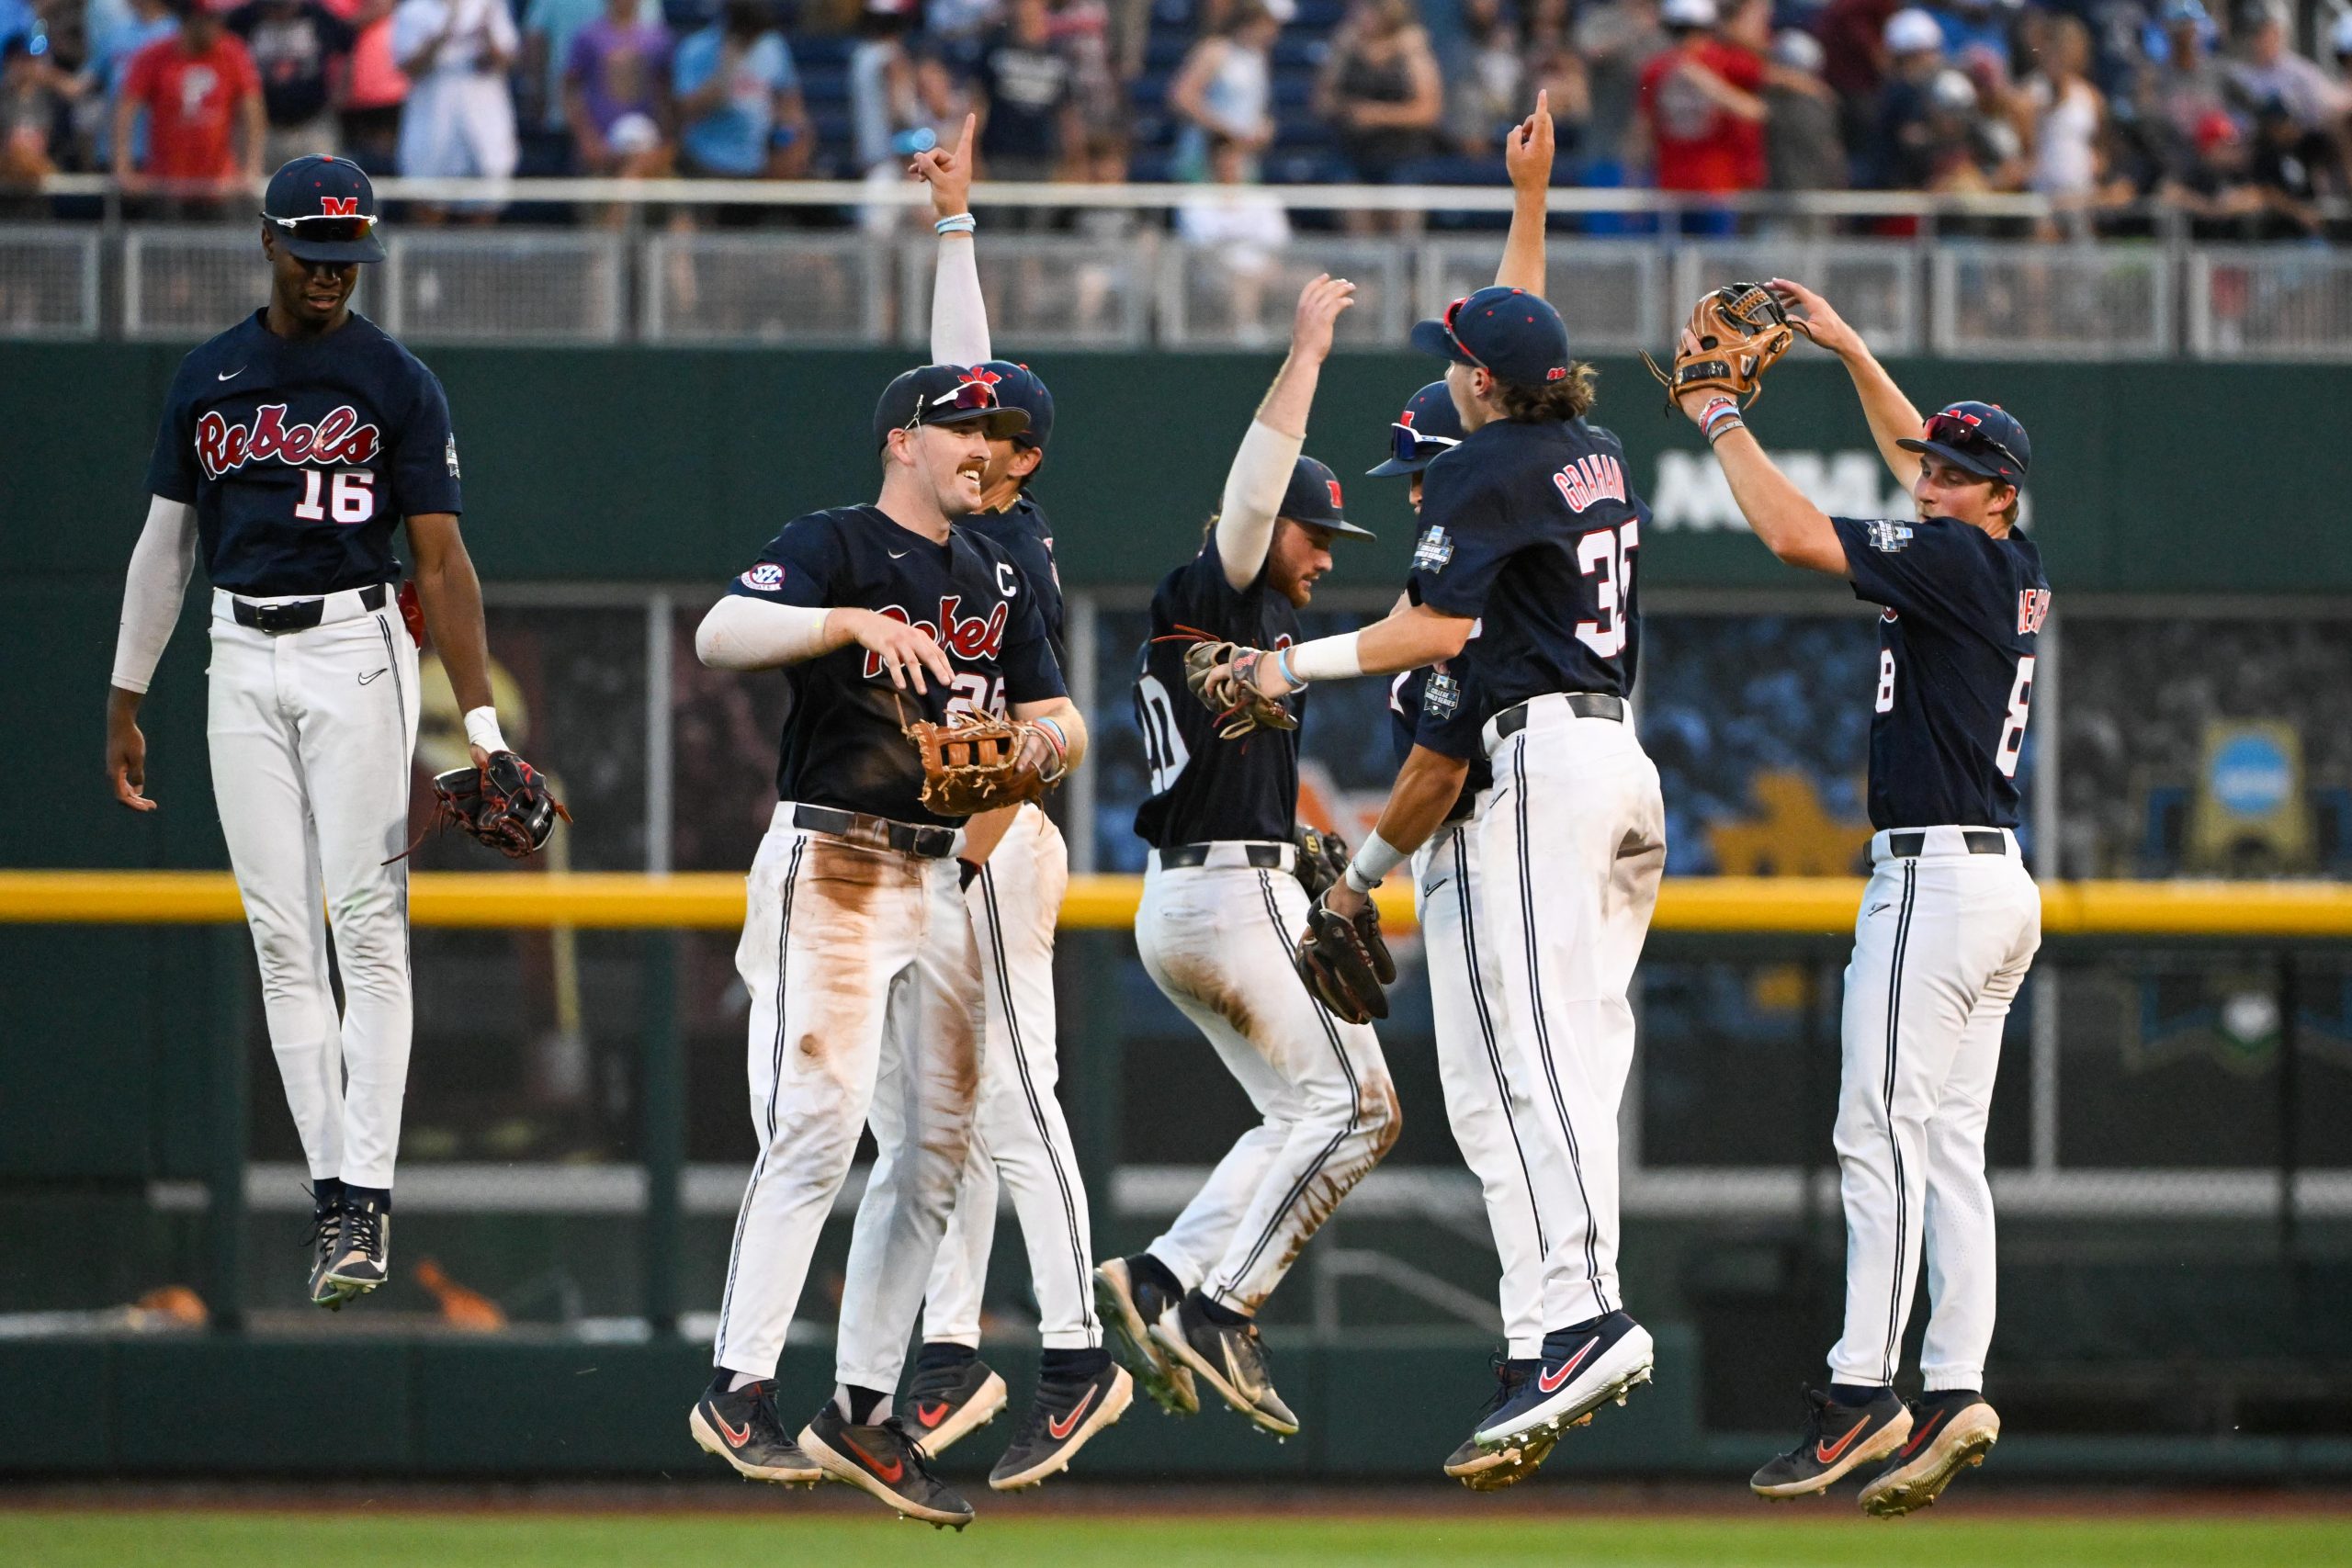 The Ole Miss Rebels celebrate after defeating the Auburn Tigers at Charles Schwab Field.